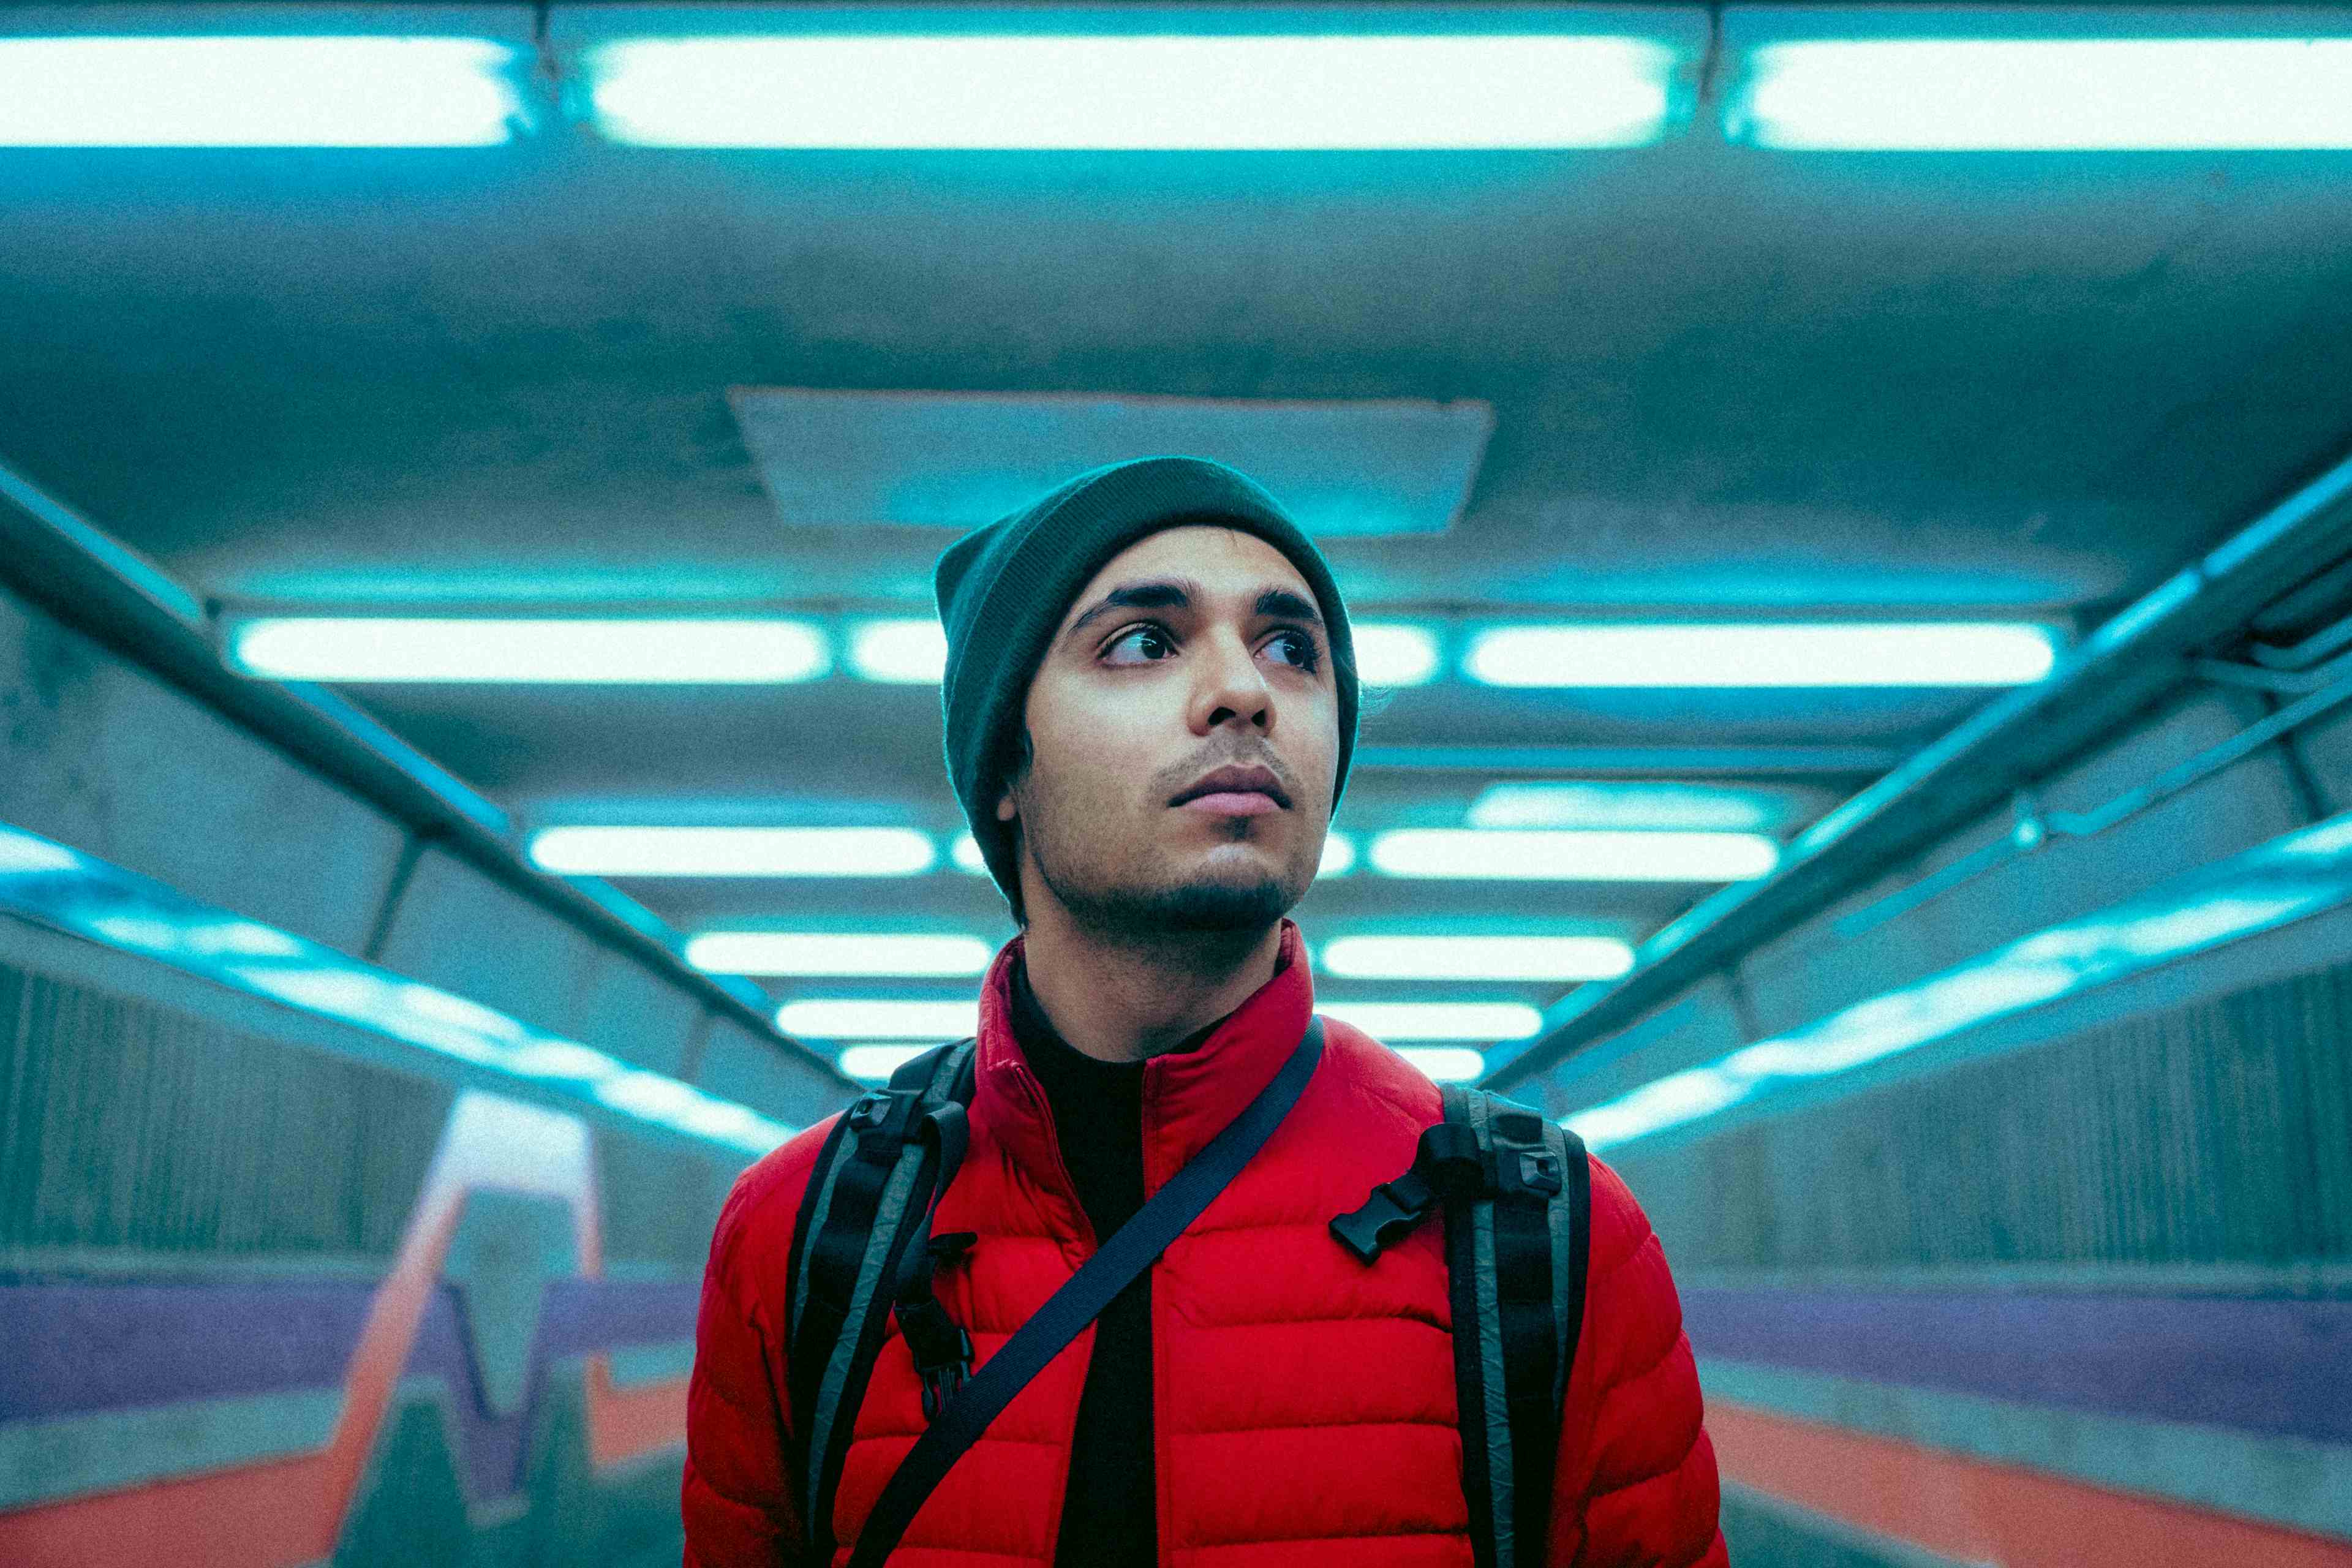 A futuristic, cinematic photo of myself standing in front of blue tinted lights in the Montreal metro, wearing a red jacket